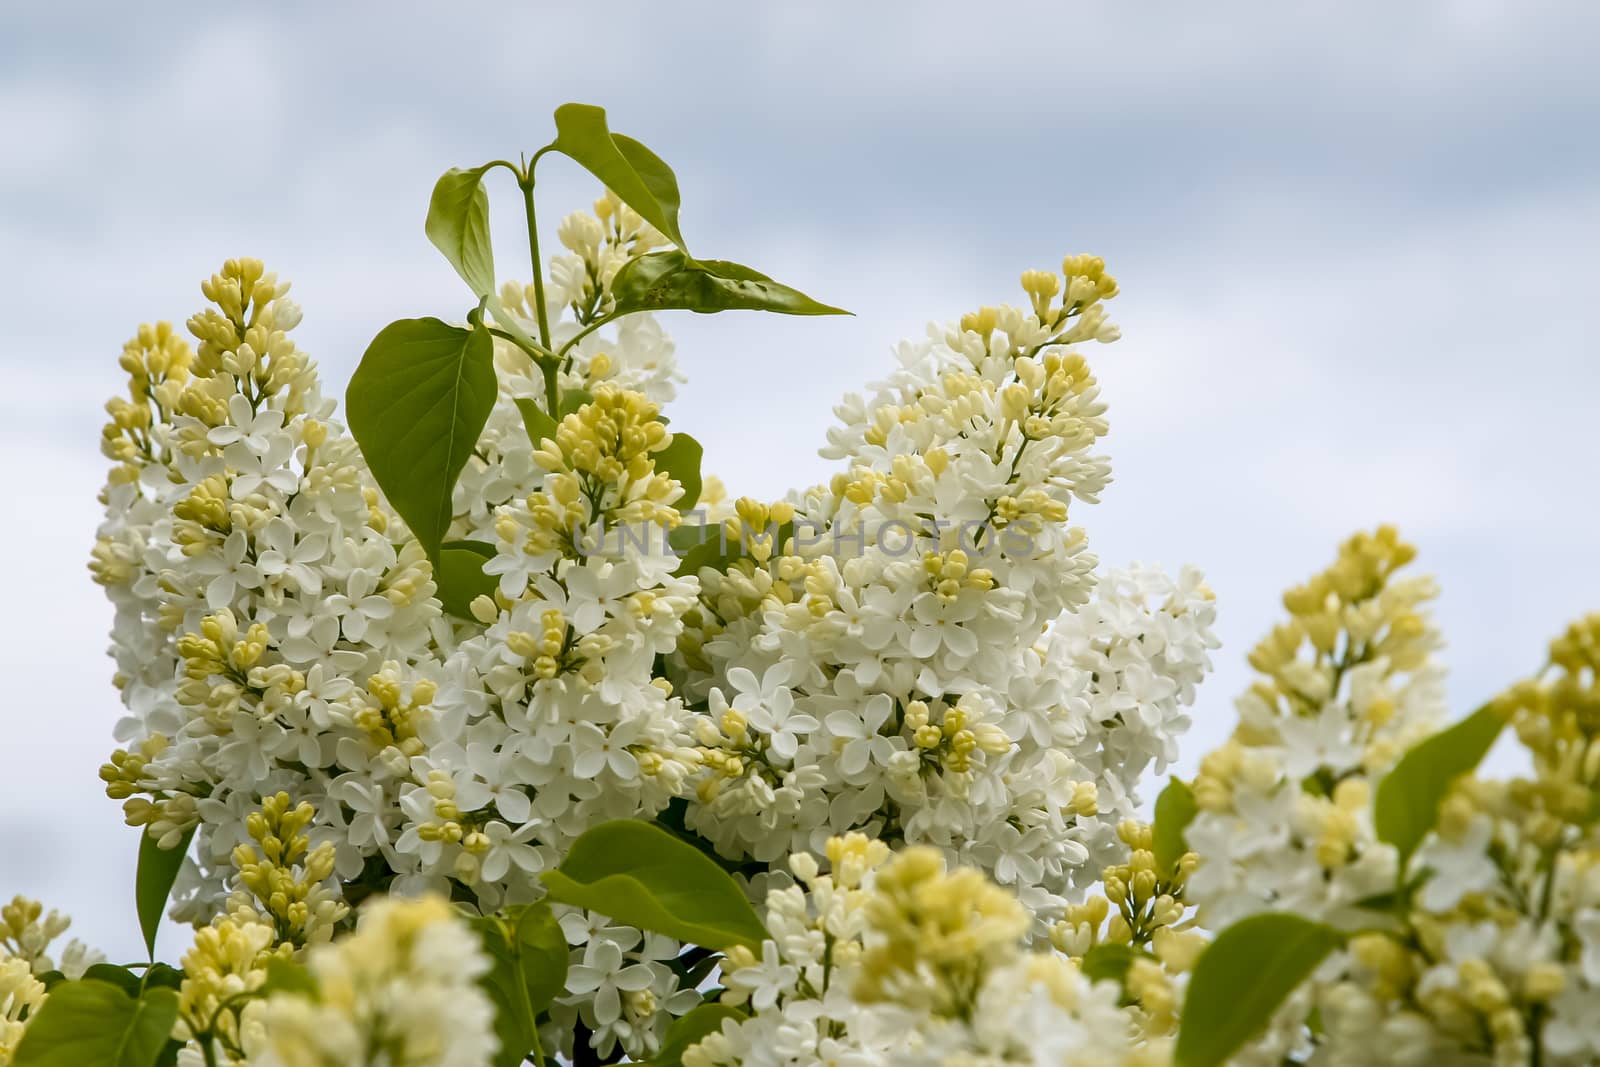 Blooming lilac bush in spring time. Blossoming lilac flowers. Flowering lilac bush in Latvia. Blooming white lilac flowers in spring season on background of sky.